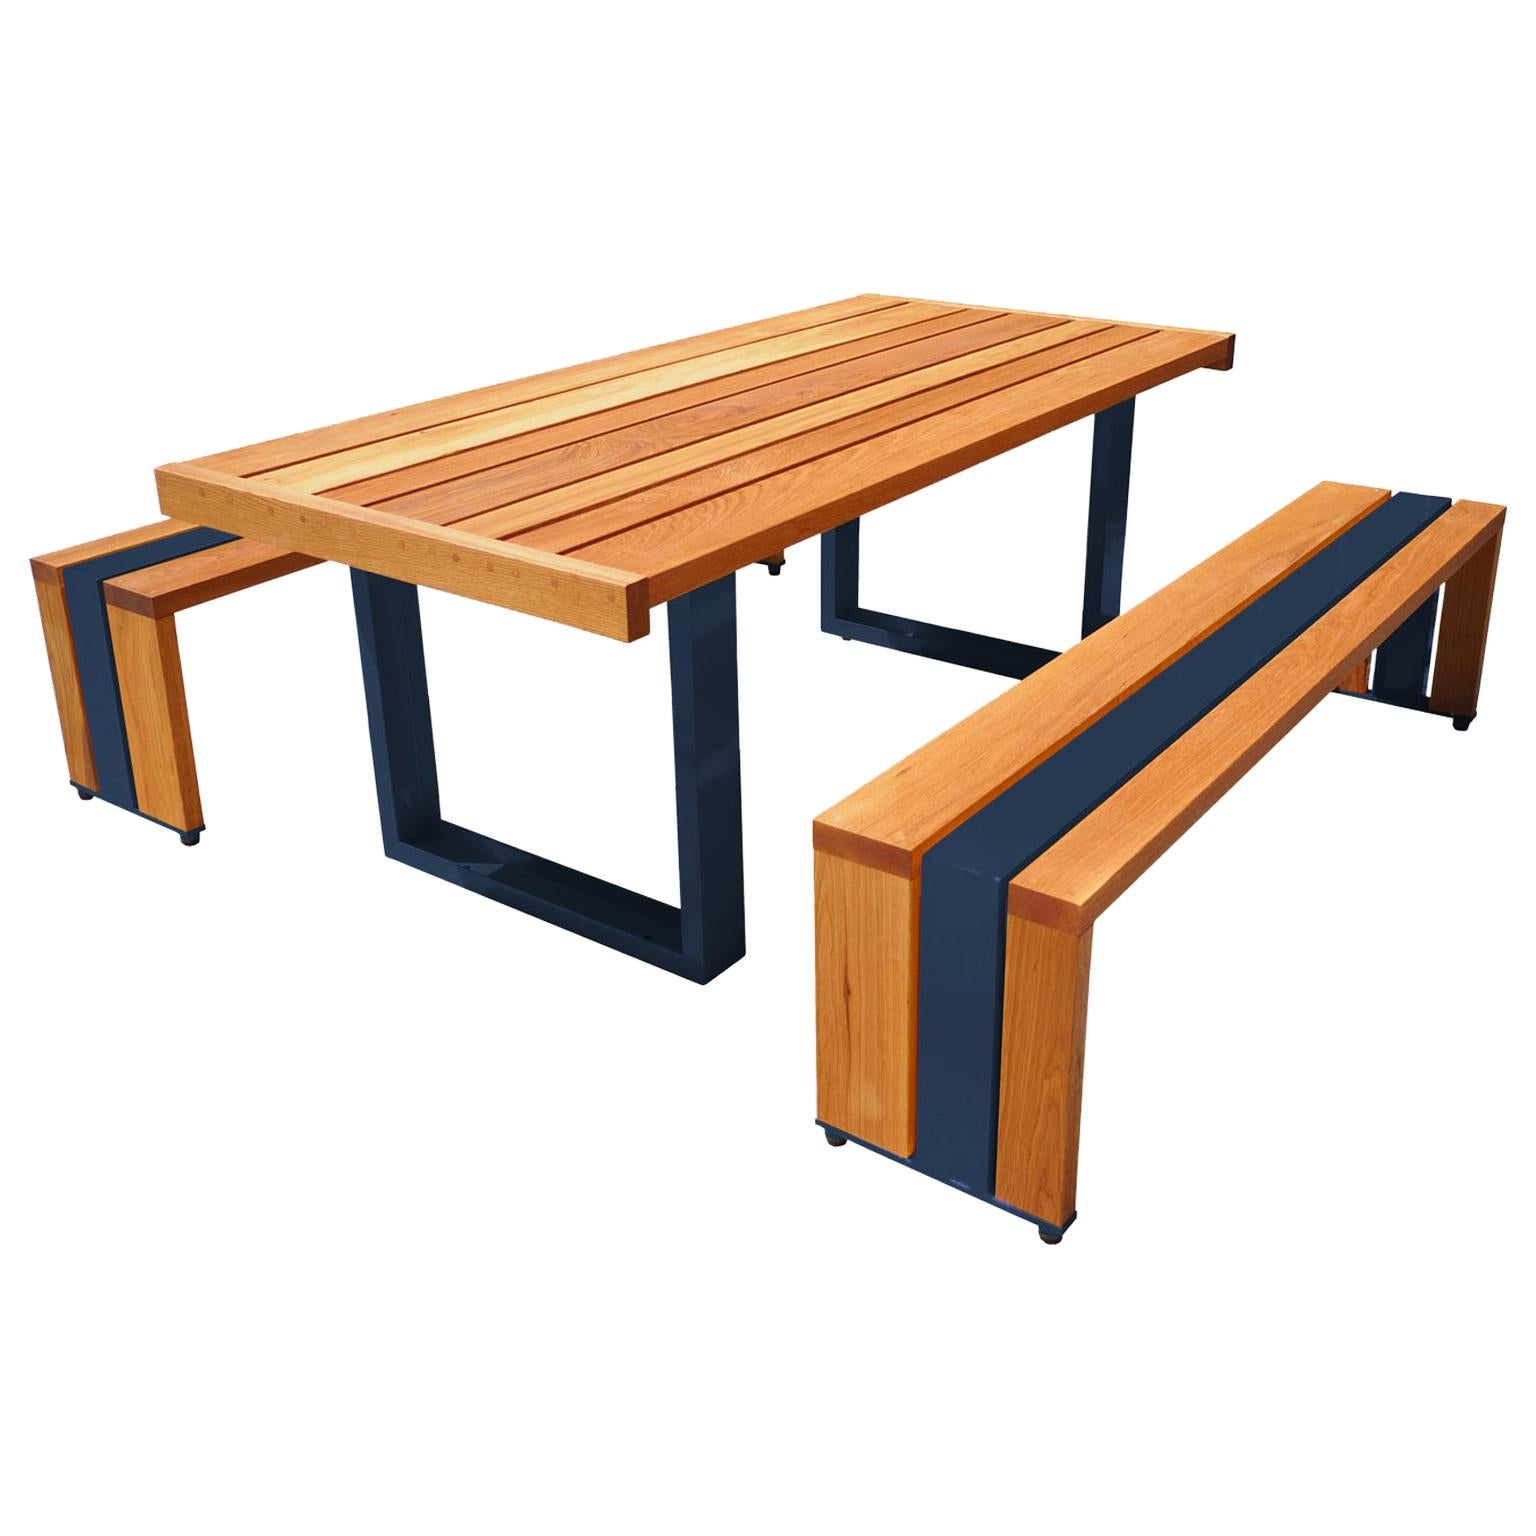 Contemporary Picnic Table / Dining Set - White Oak For Sale